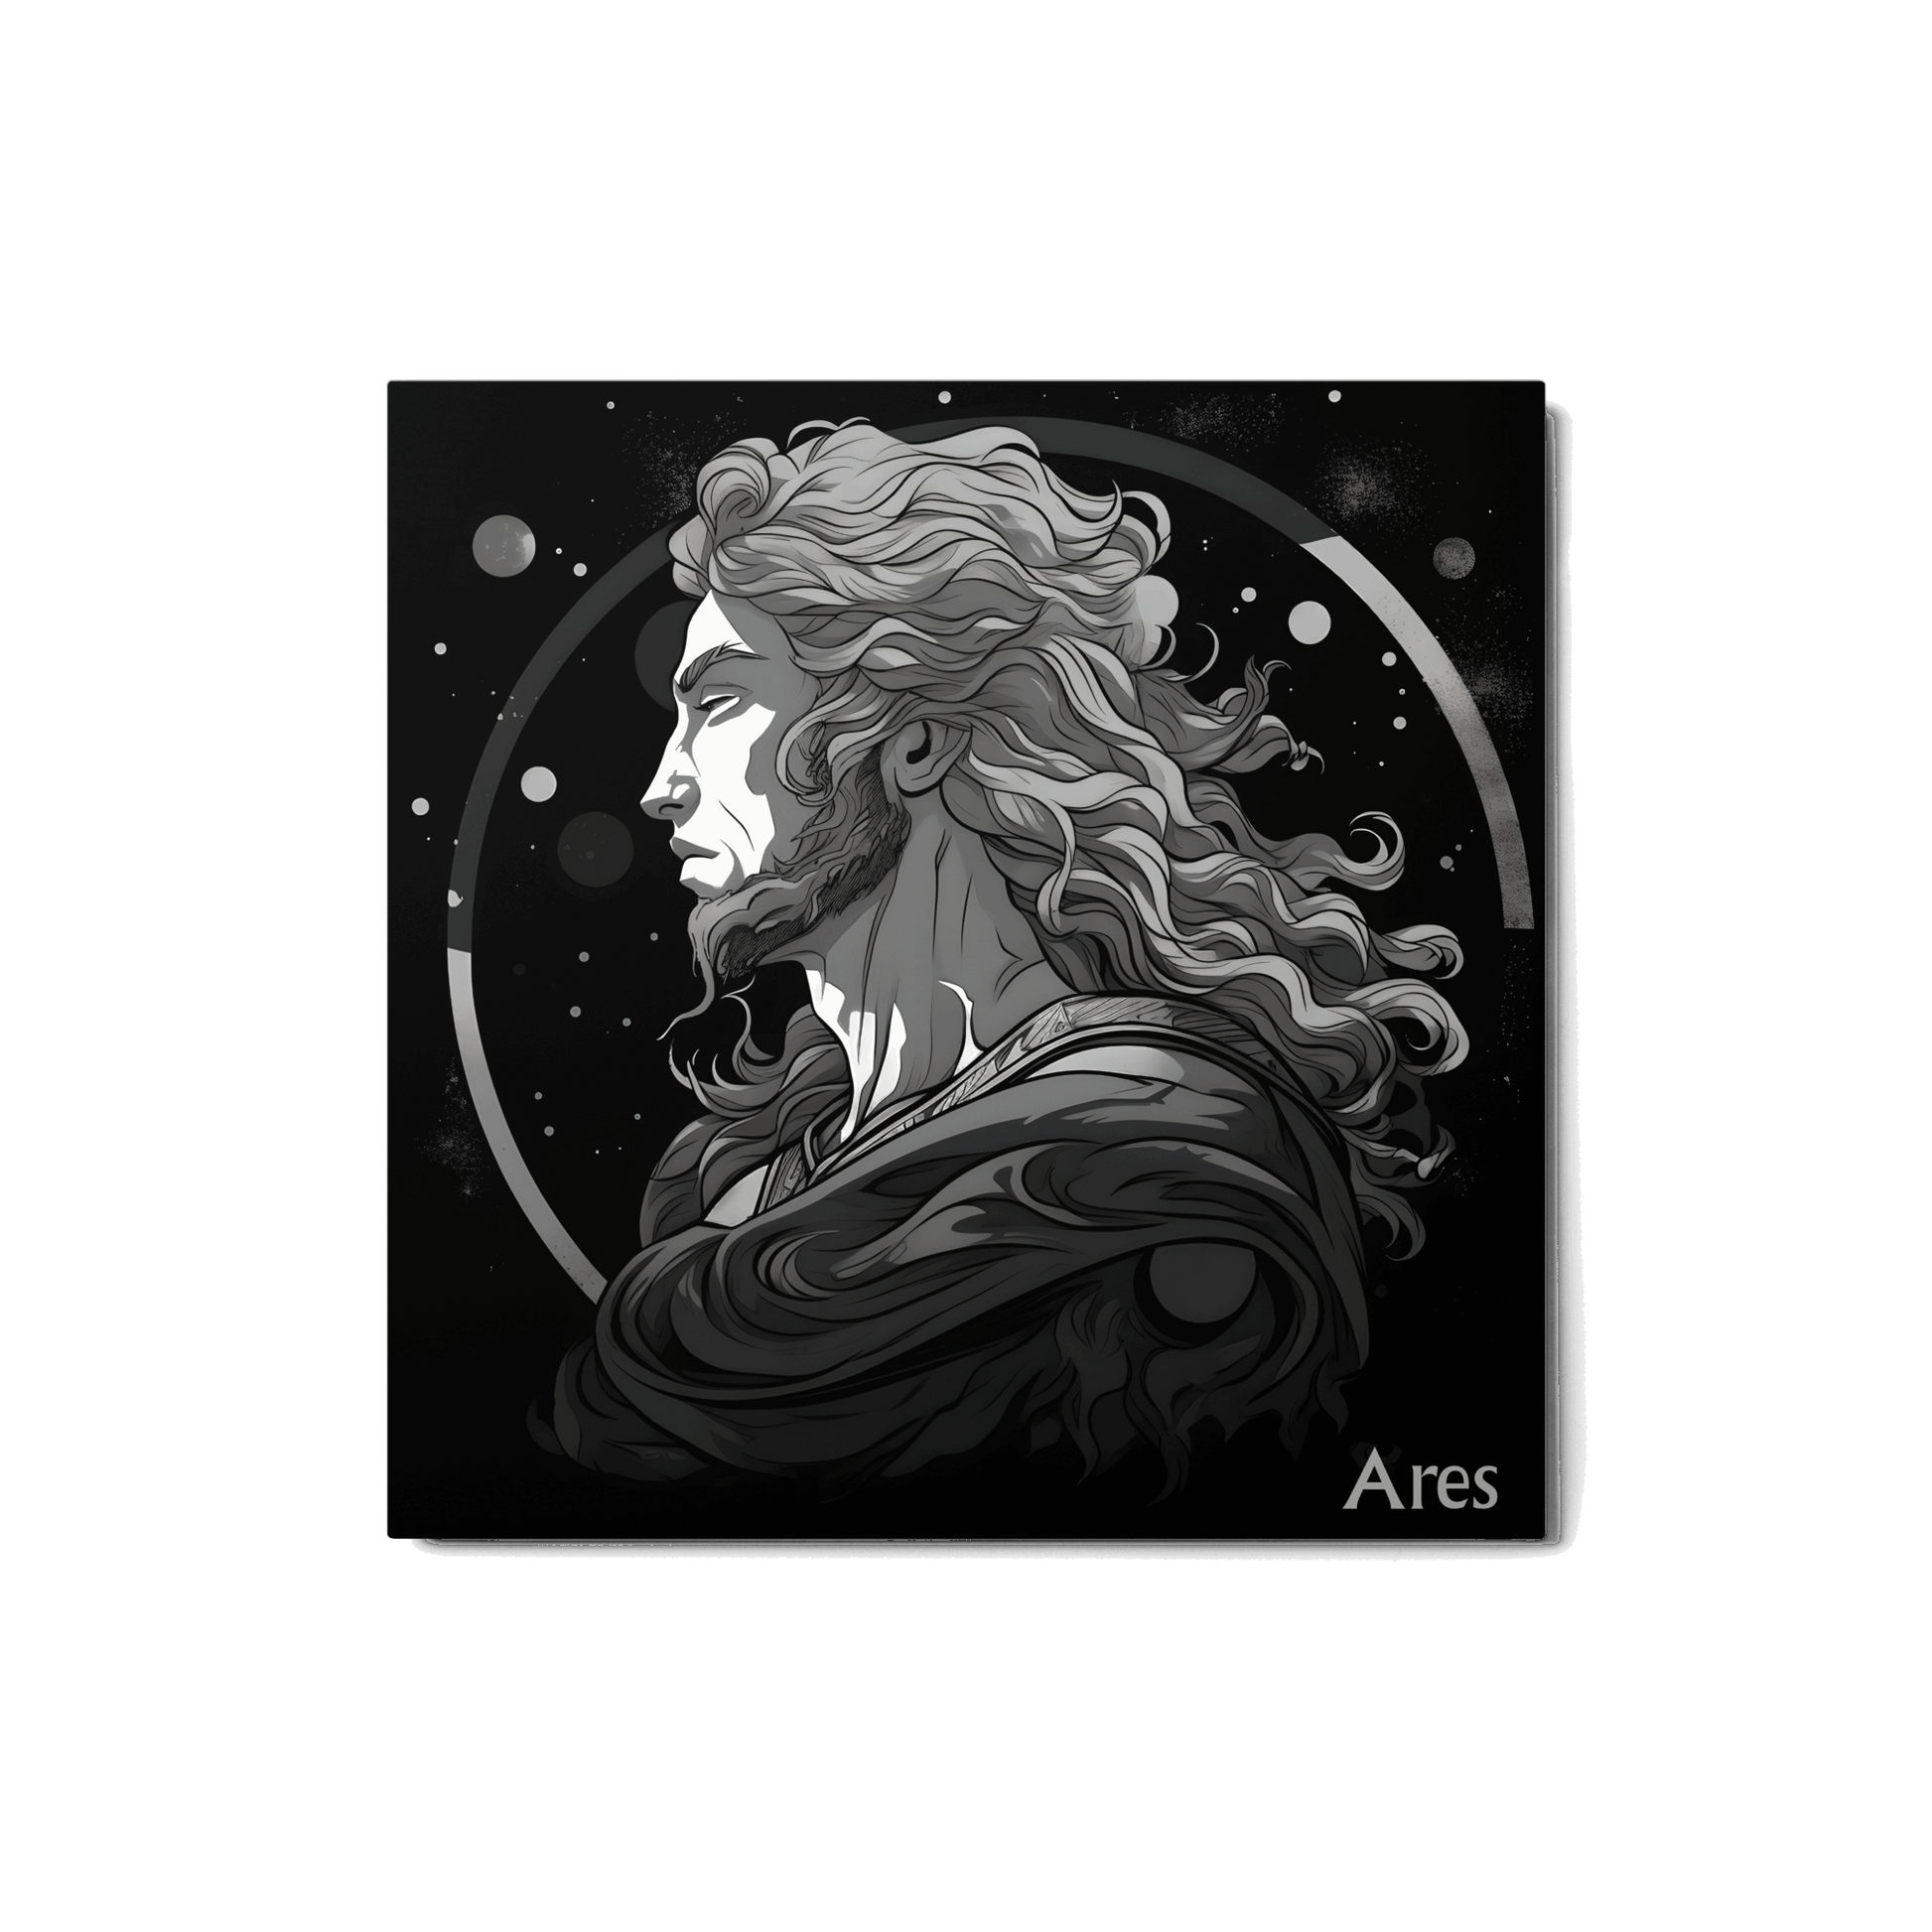 Ares' Courage - Black and White Hanging Wall Art High Quality Metal Print DrawDadDraw